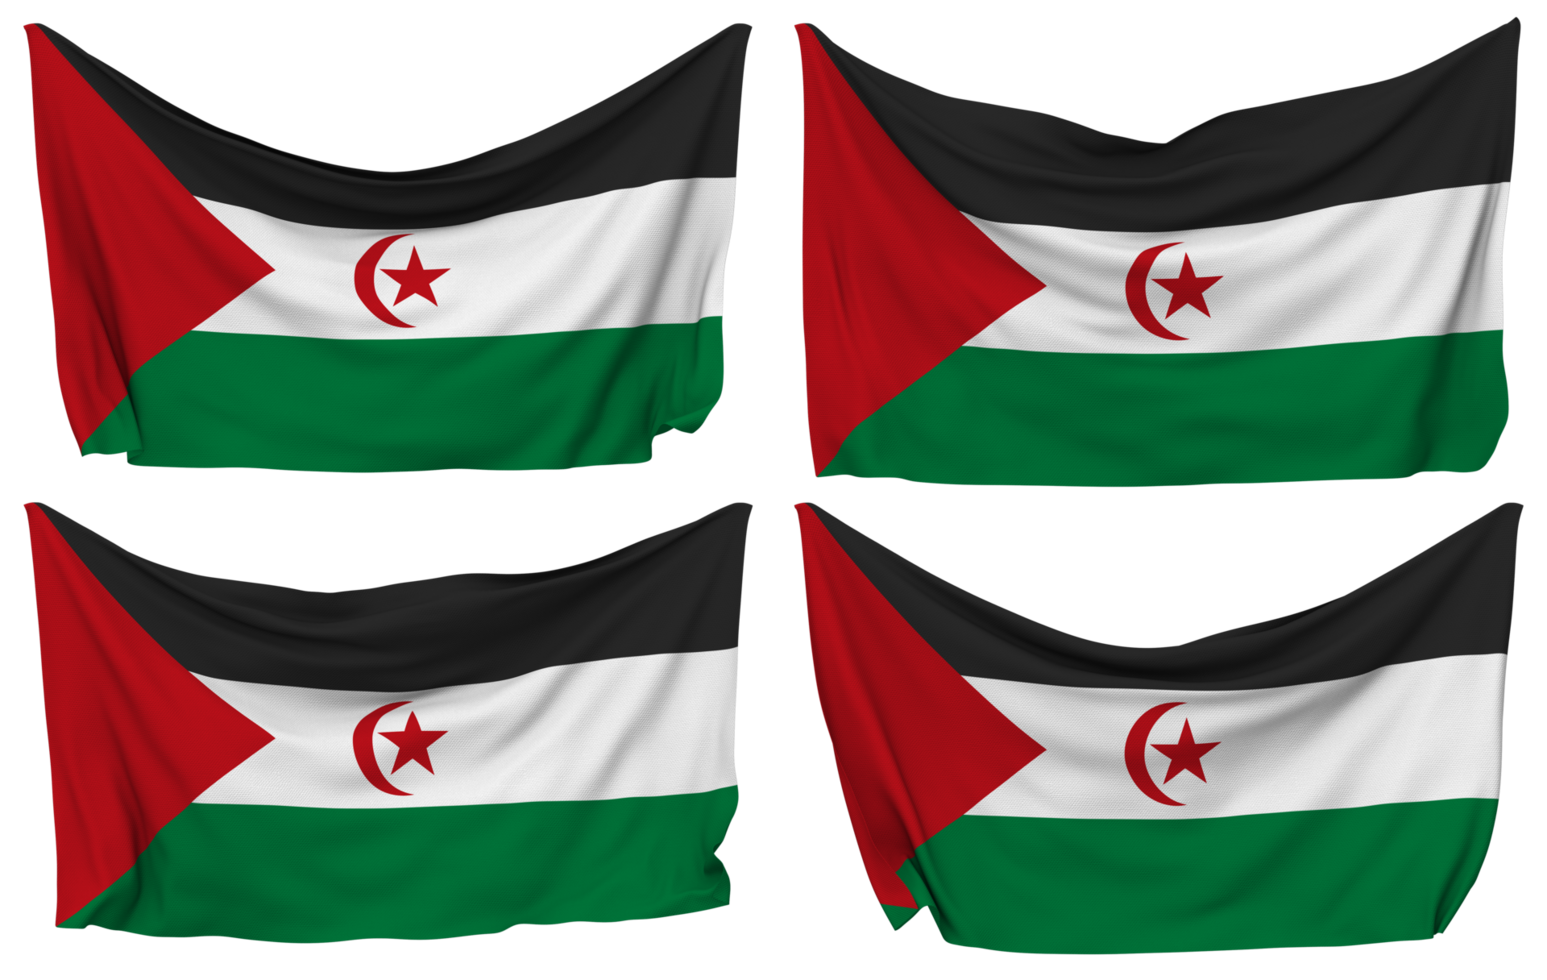 Sahrawi Arab Democratic Republic Pinned Flag from Corners, Isolated with Different Waving Variations, 3D Rendering png